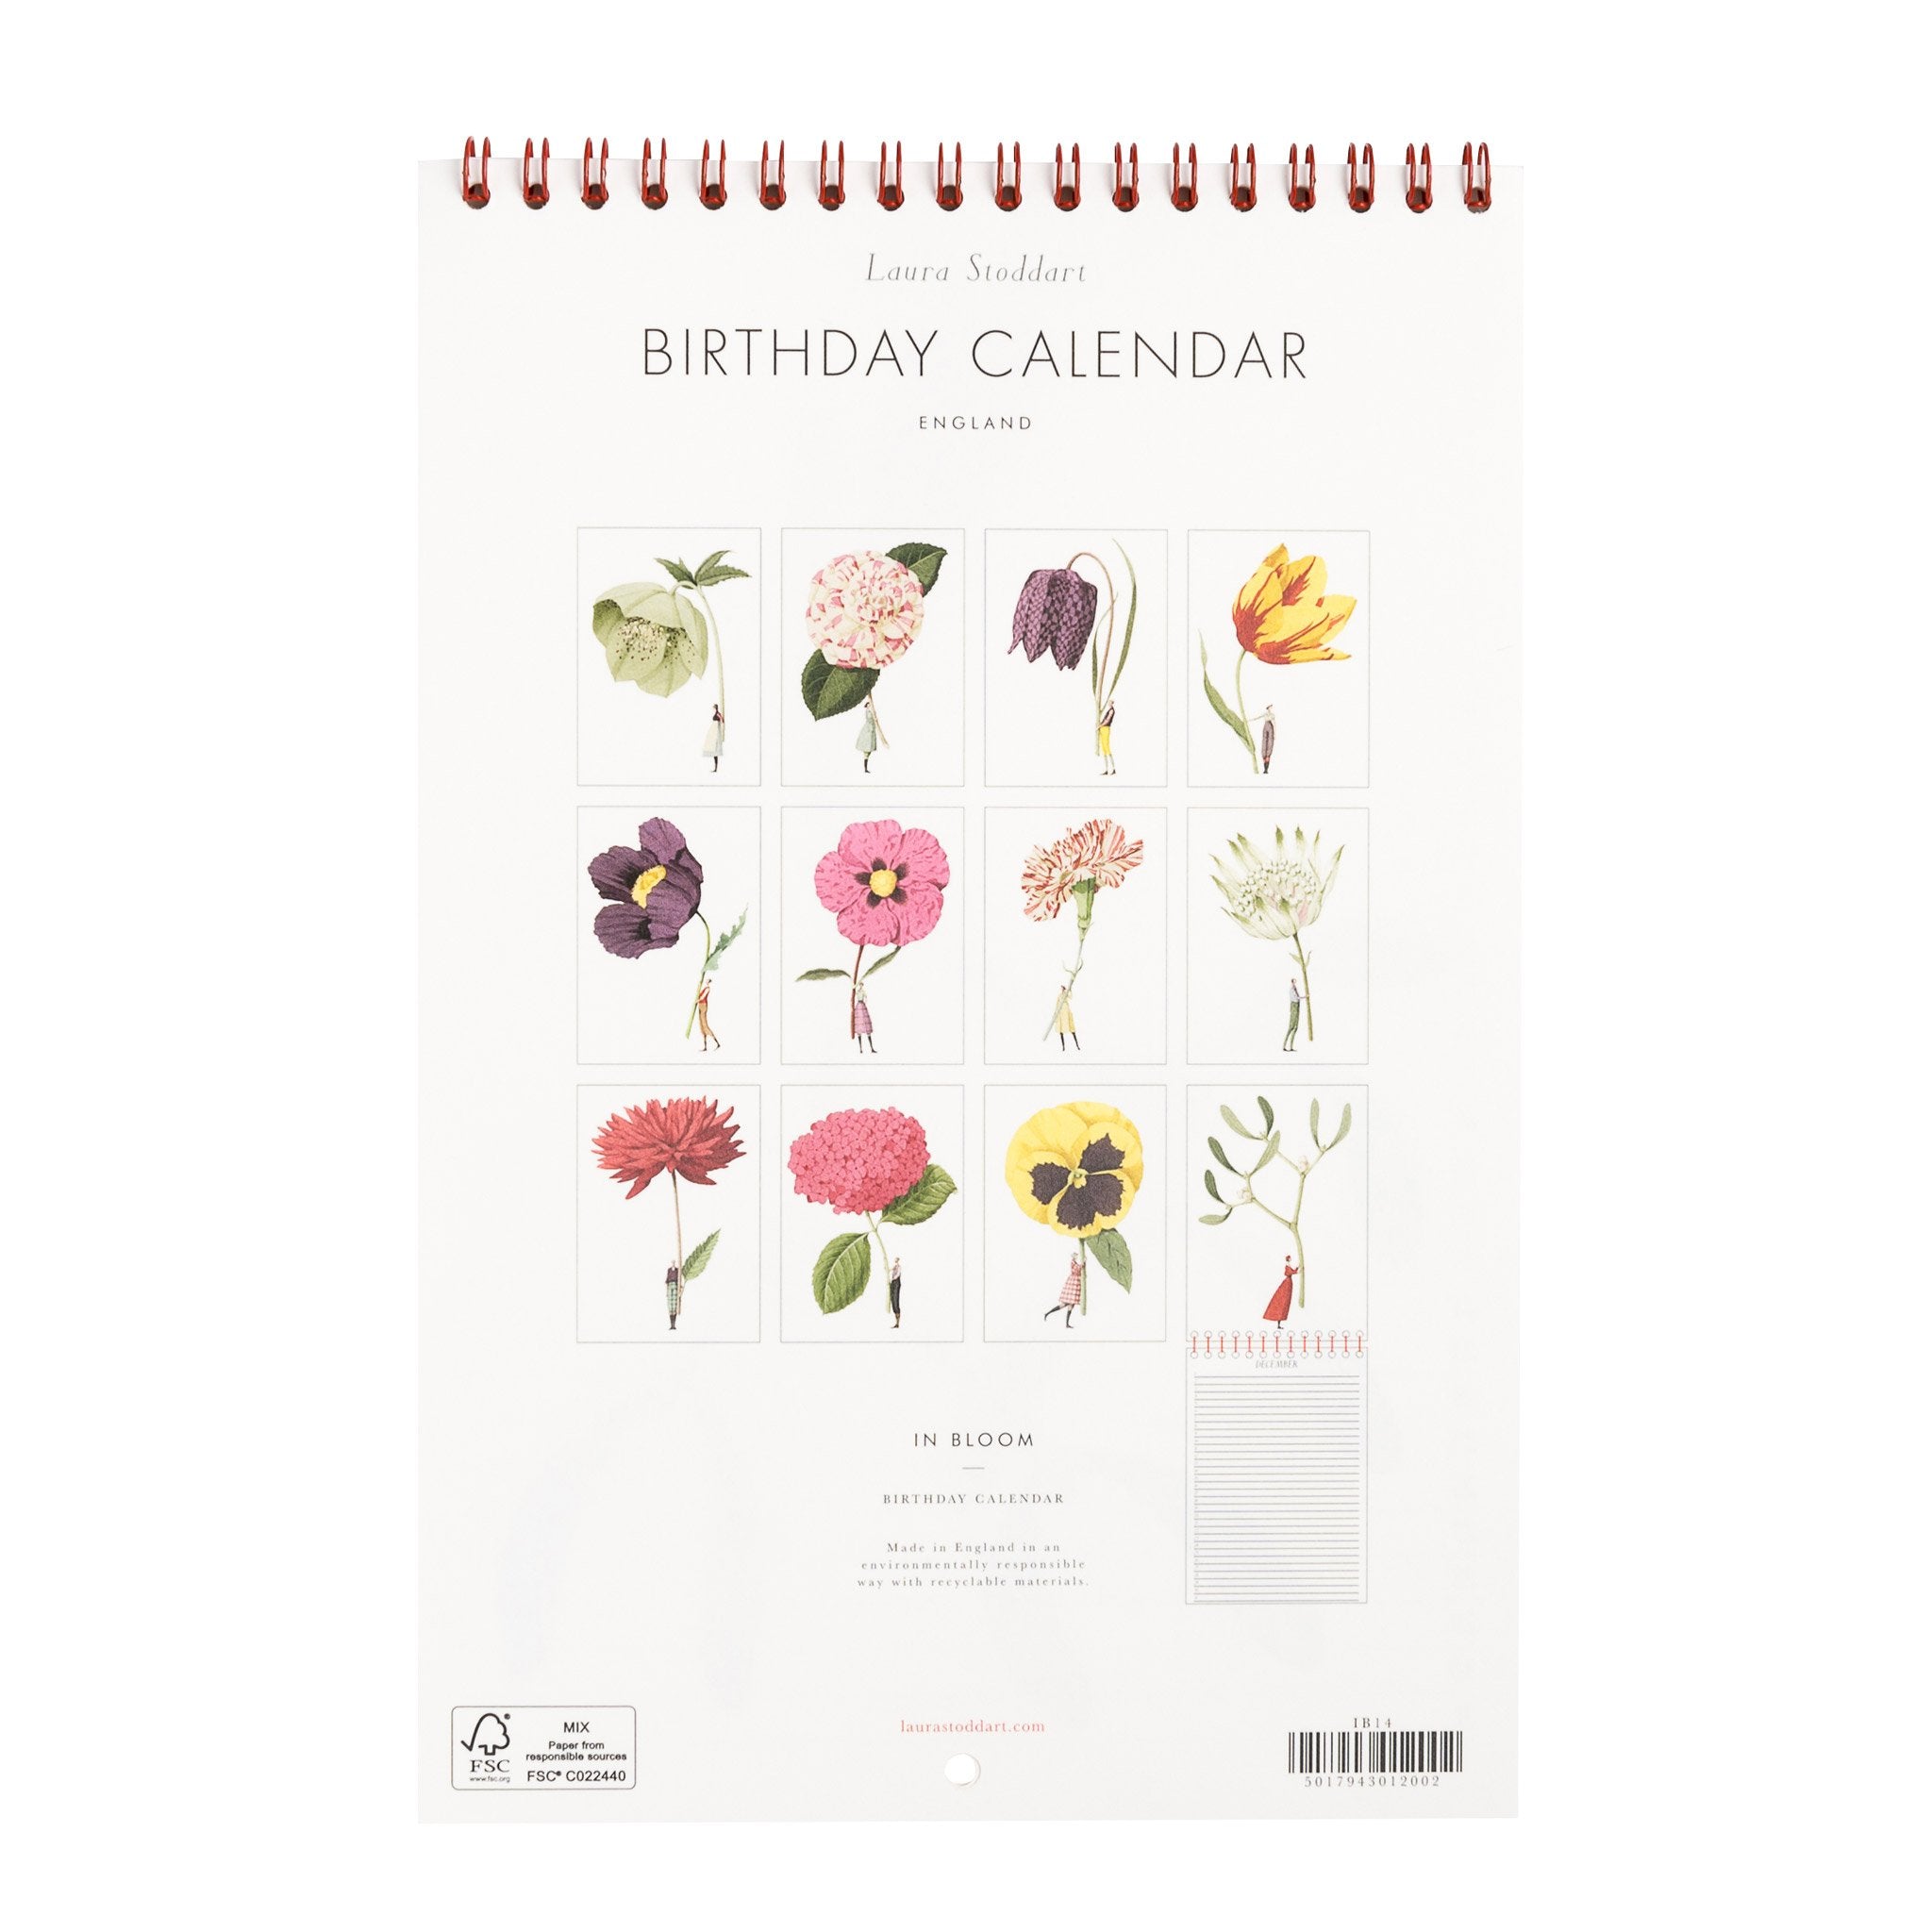 A perpetual In Bloom Birthday Calendar with an illustration of a flower from the In Bloom collection by Hester &amp; Cook.